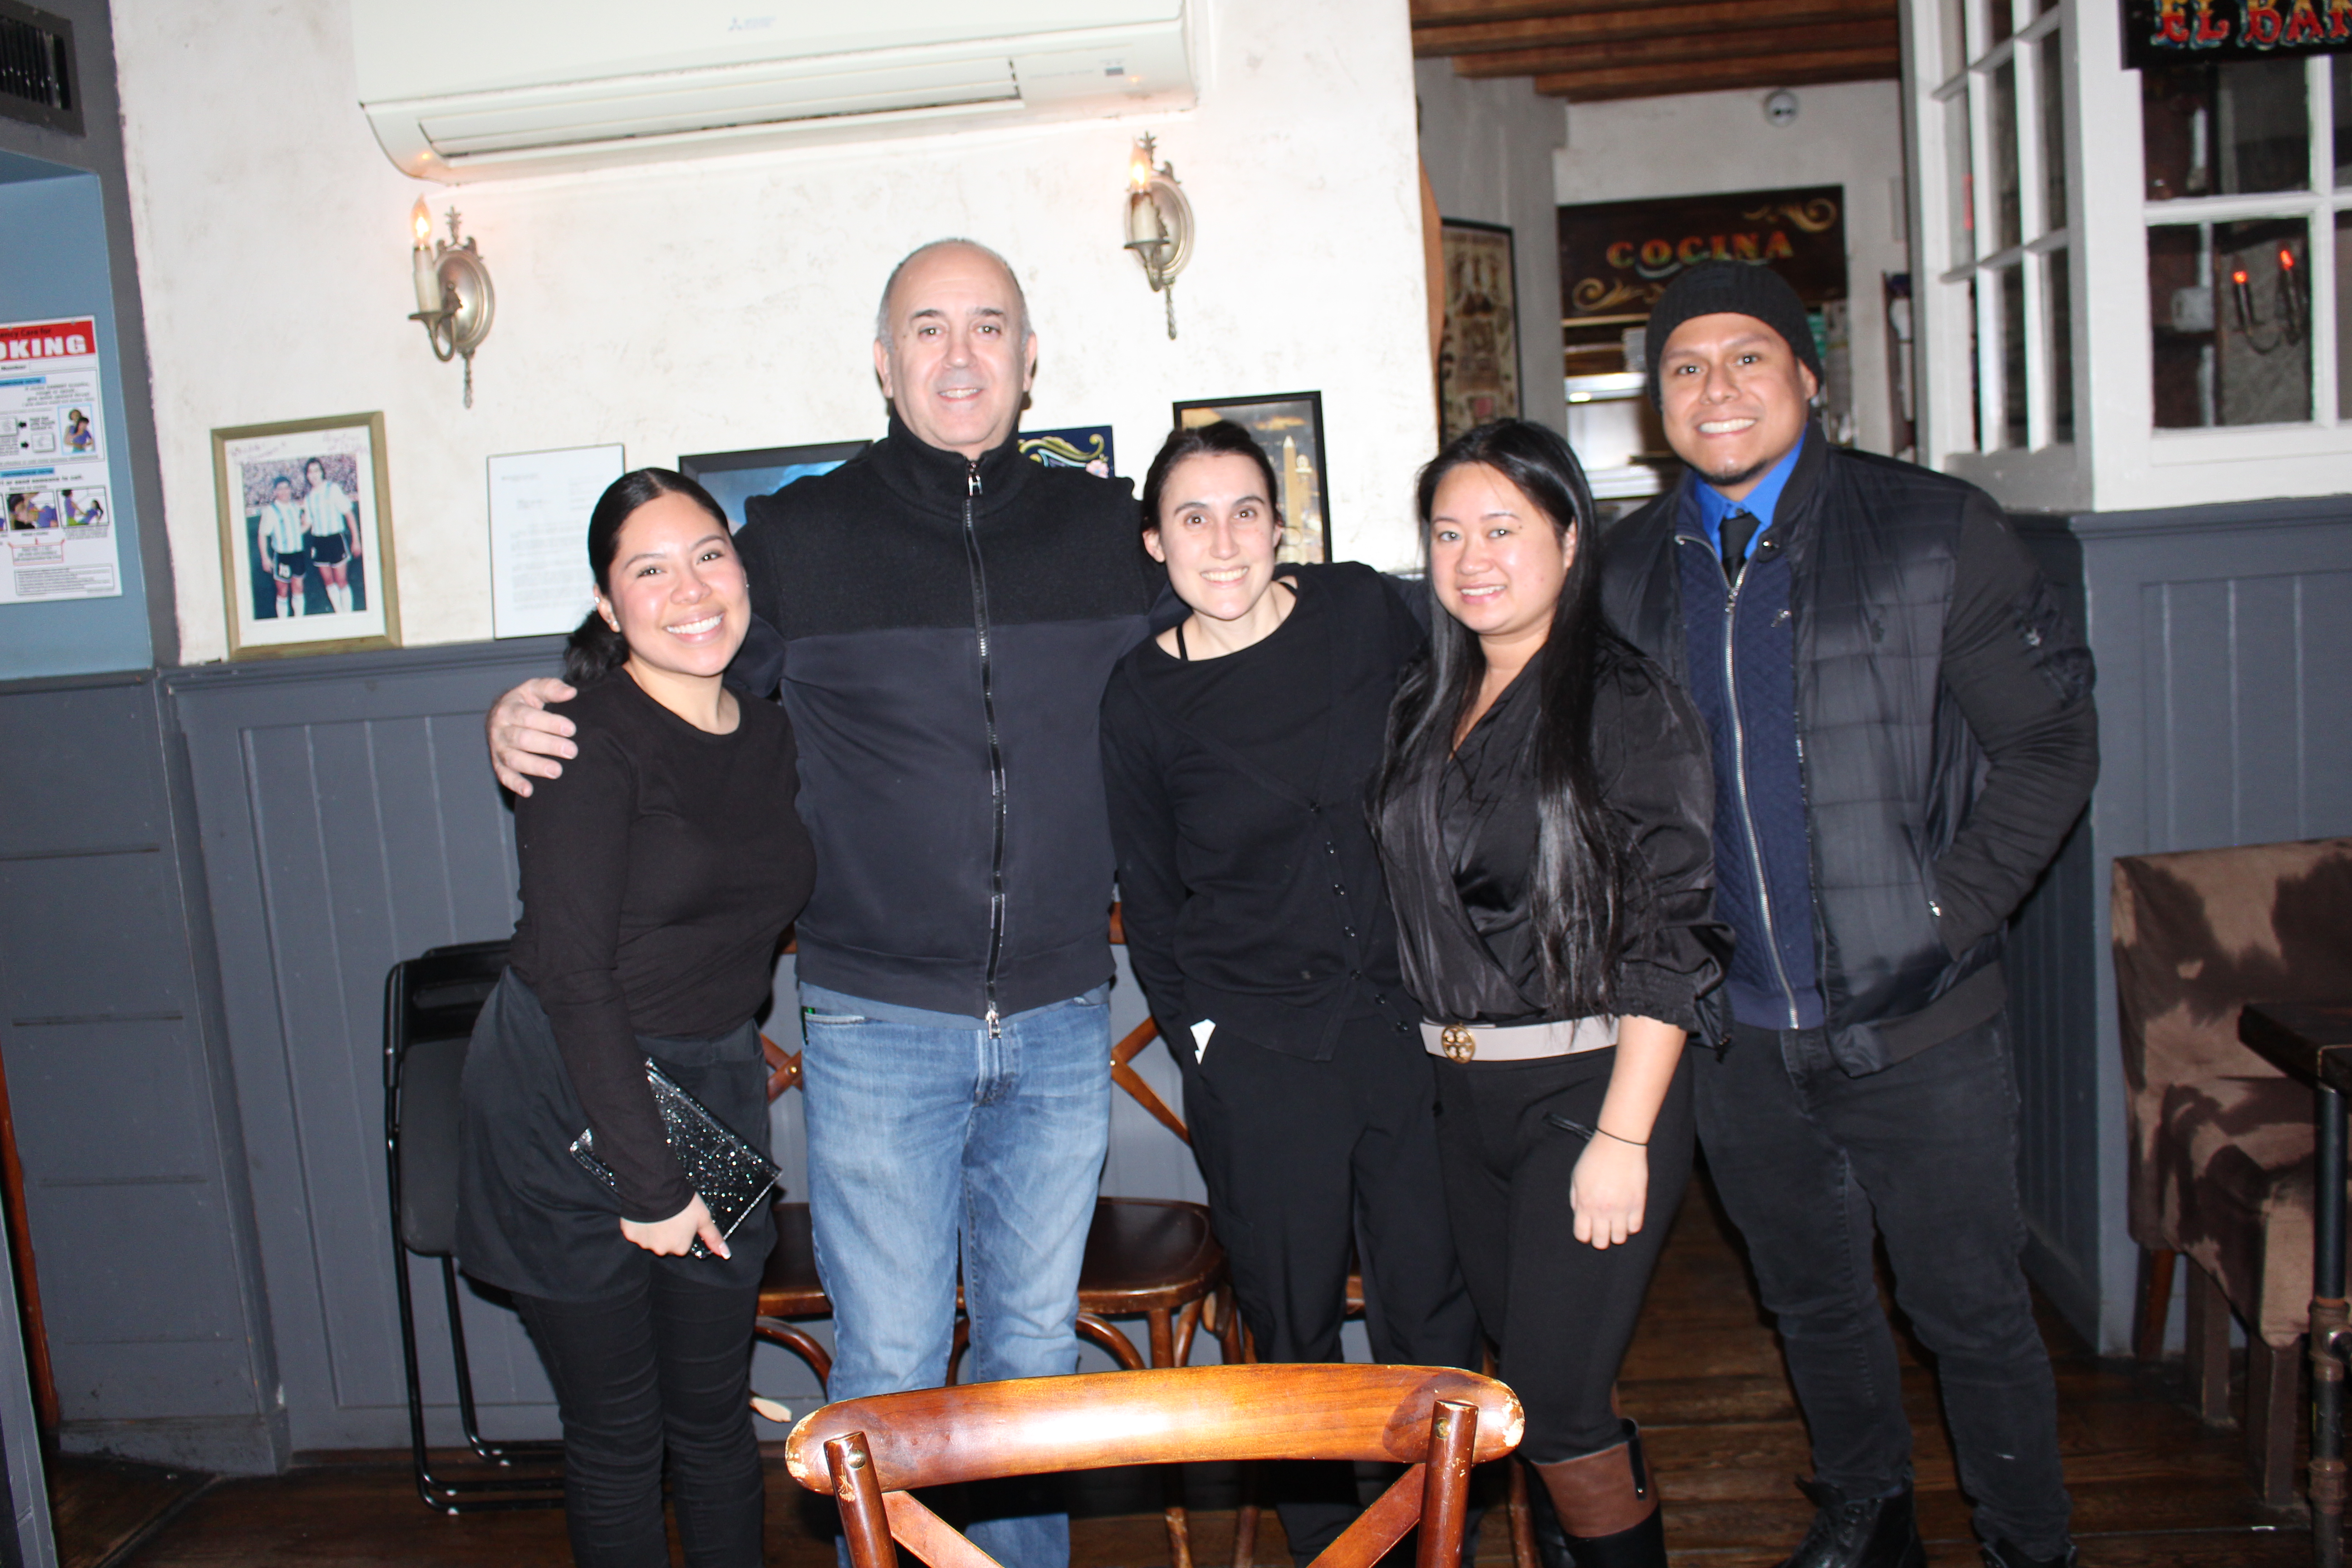 Walter Aragonez says that the Malbec staff have become like a part of his family. Photo: Jensen Toussaint/AL DÍA News.